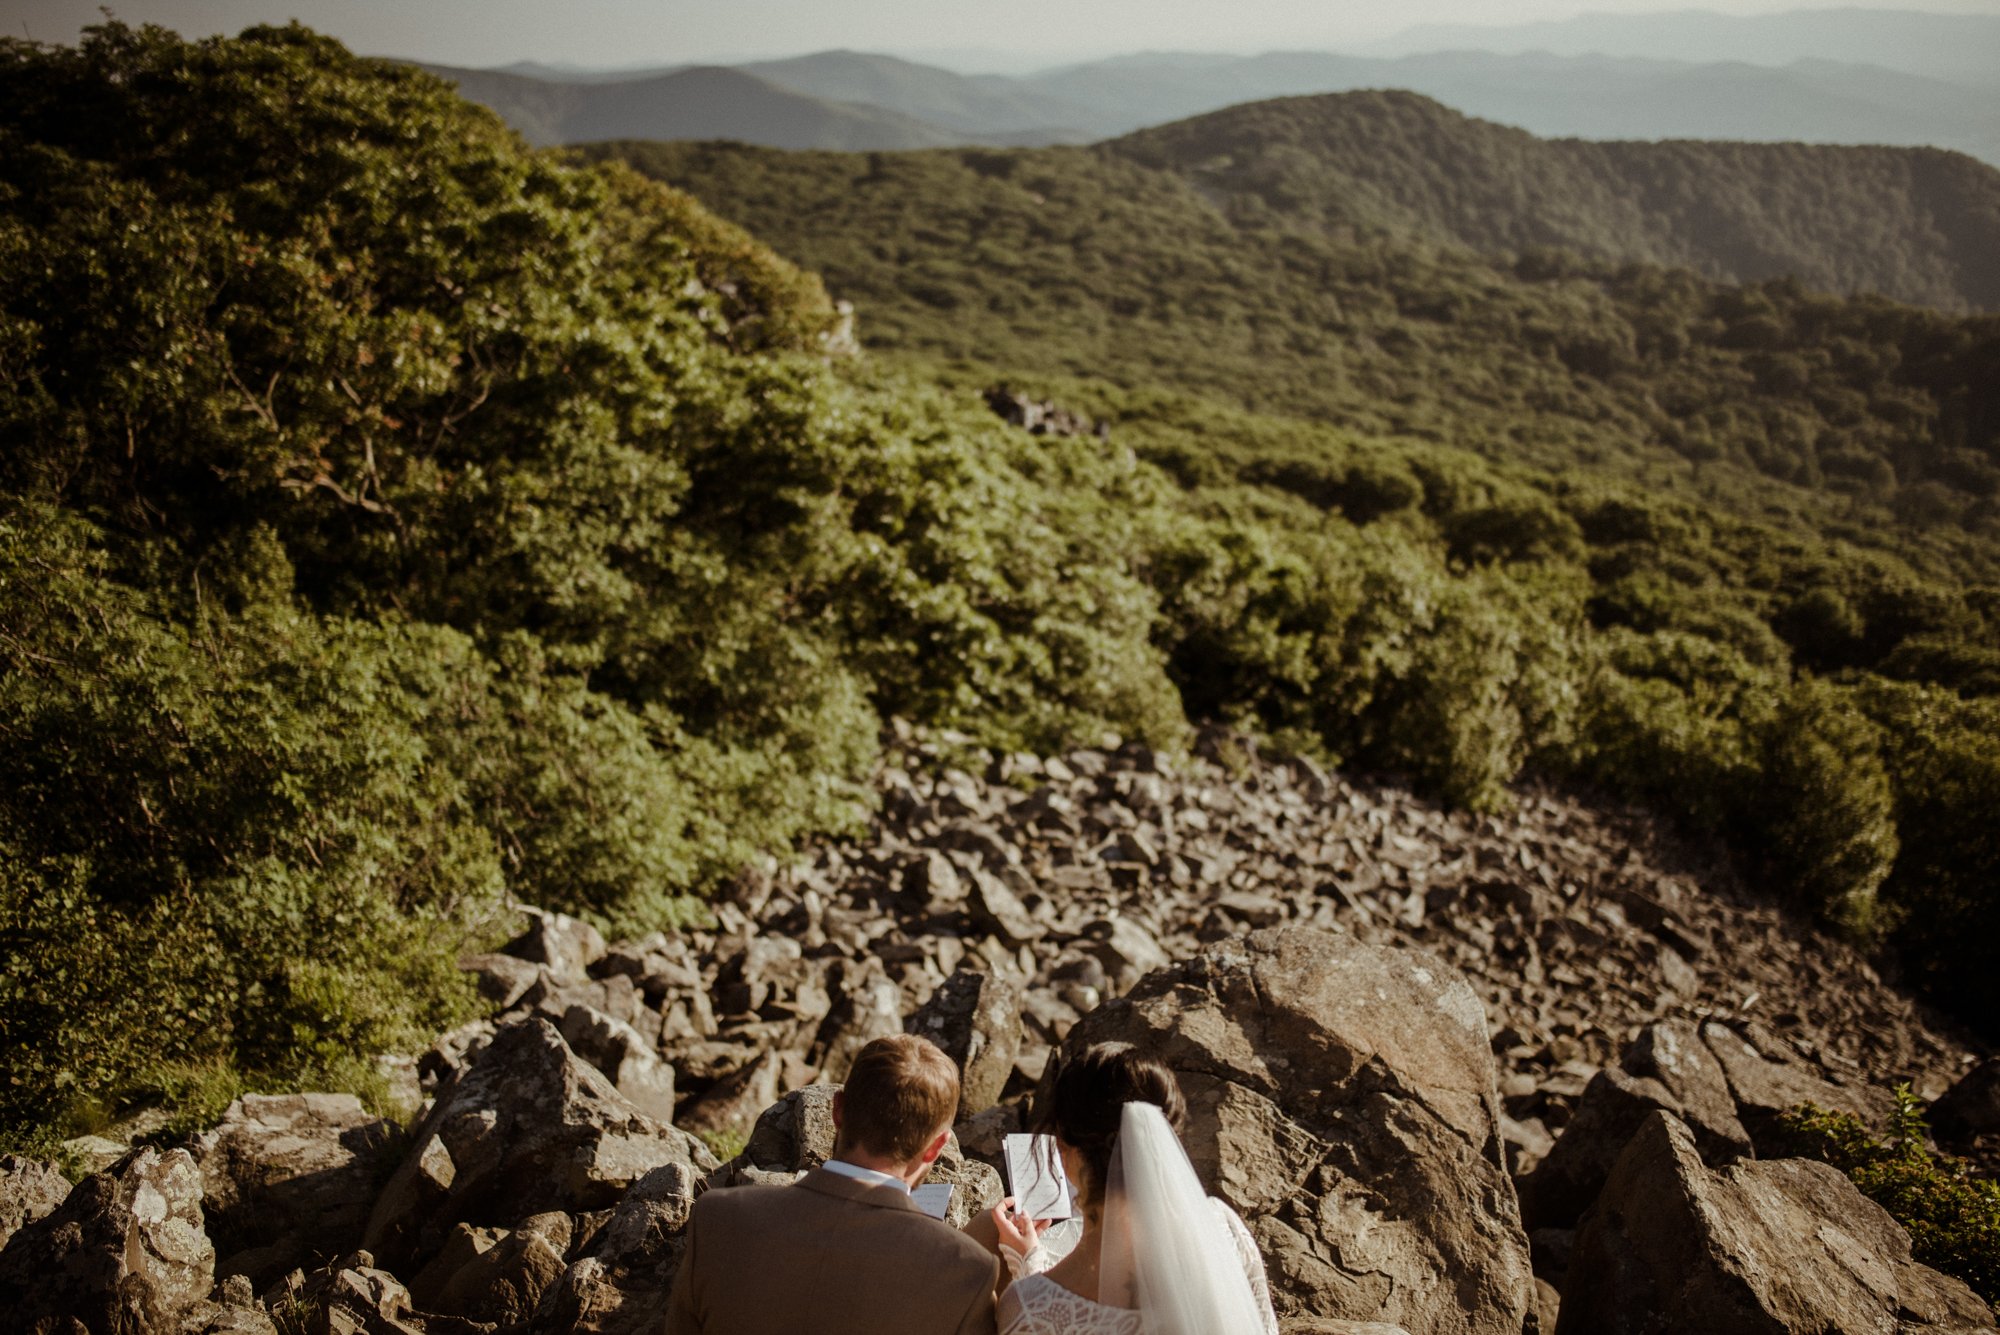 Sunset Elopement on Stony Man Summit in Shenandoah National Park - White Sails Creative Elopement Photography - July Elopement on the Blue Ridge Parkway_15.jpg